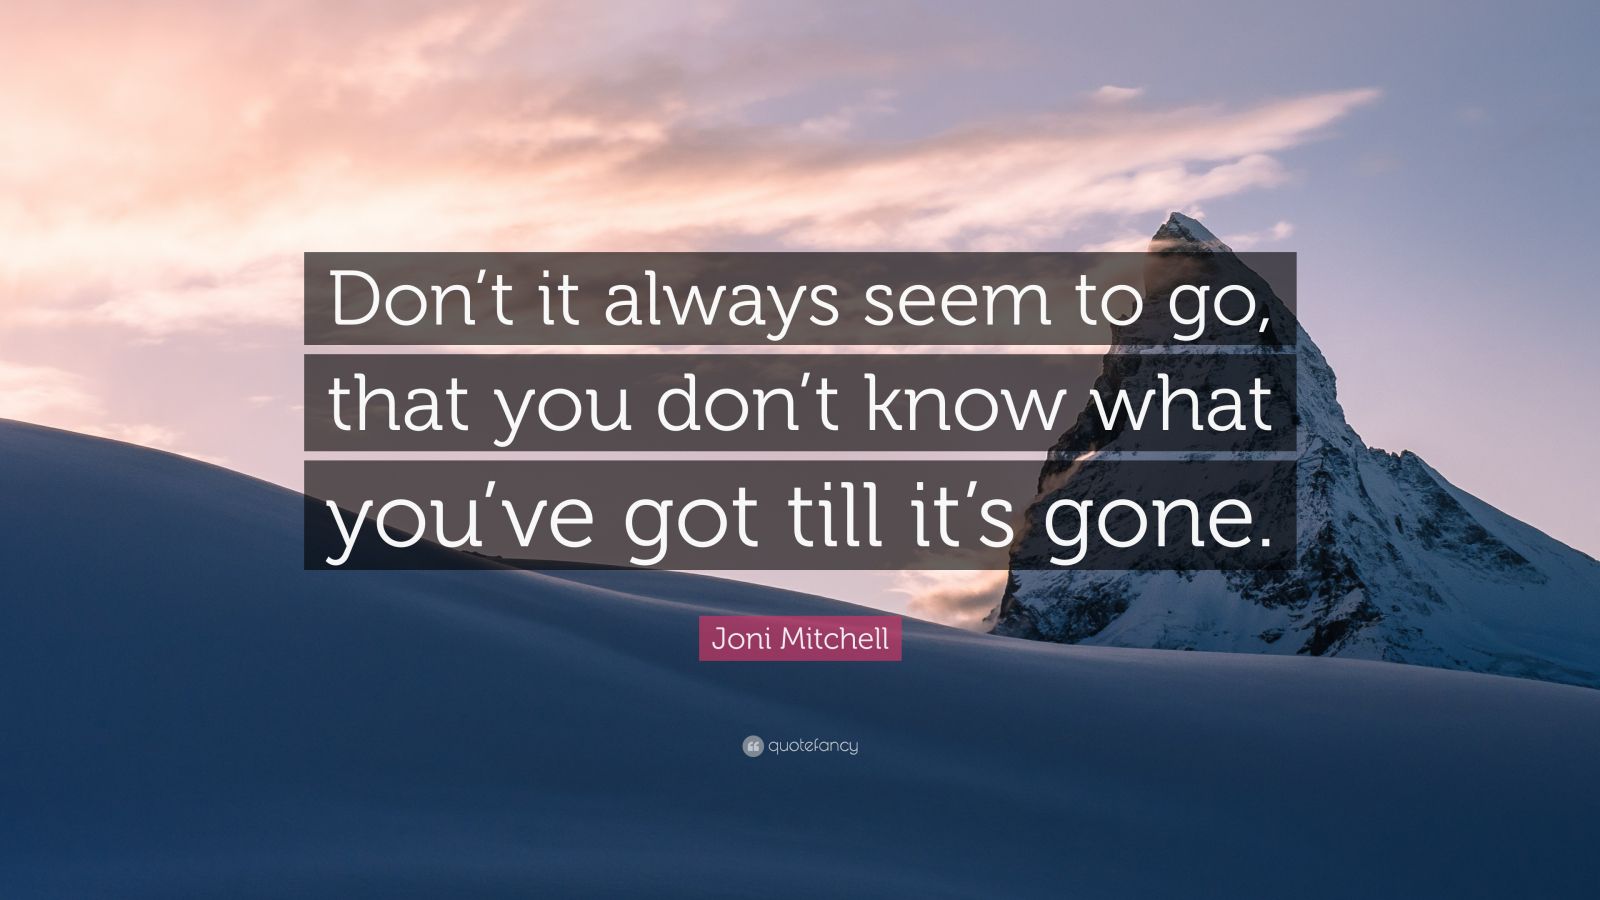 Joni Mitchell Quote: "Don't it always seem to go, that you don't know what you've got till it's ...